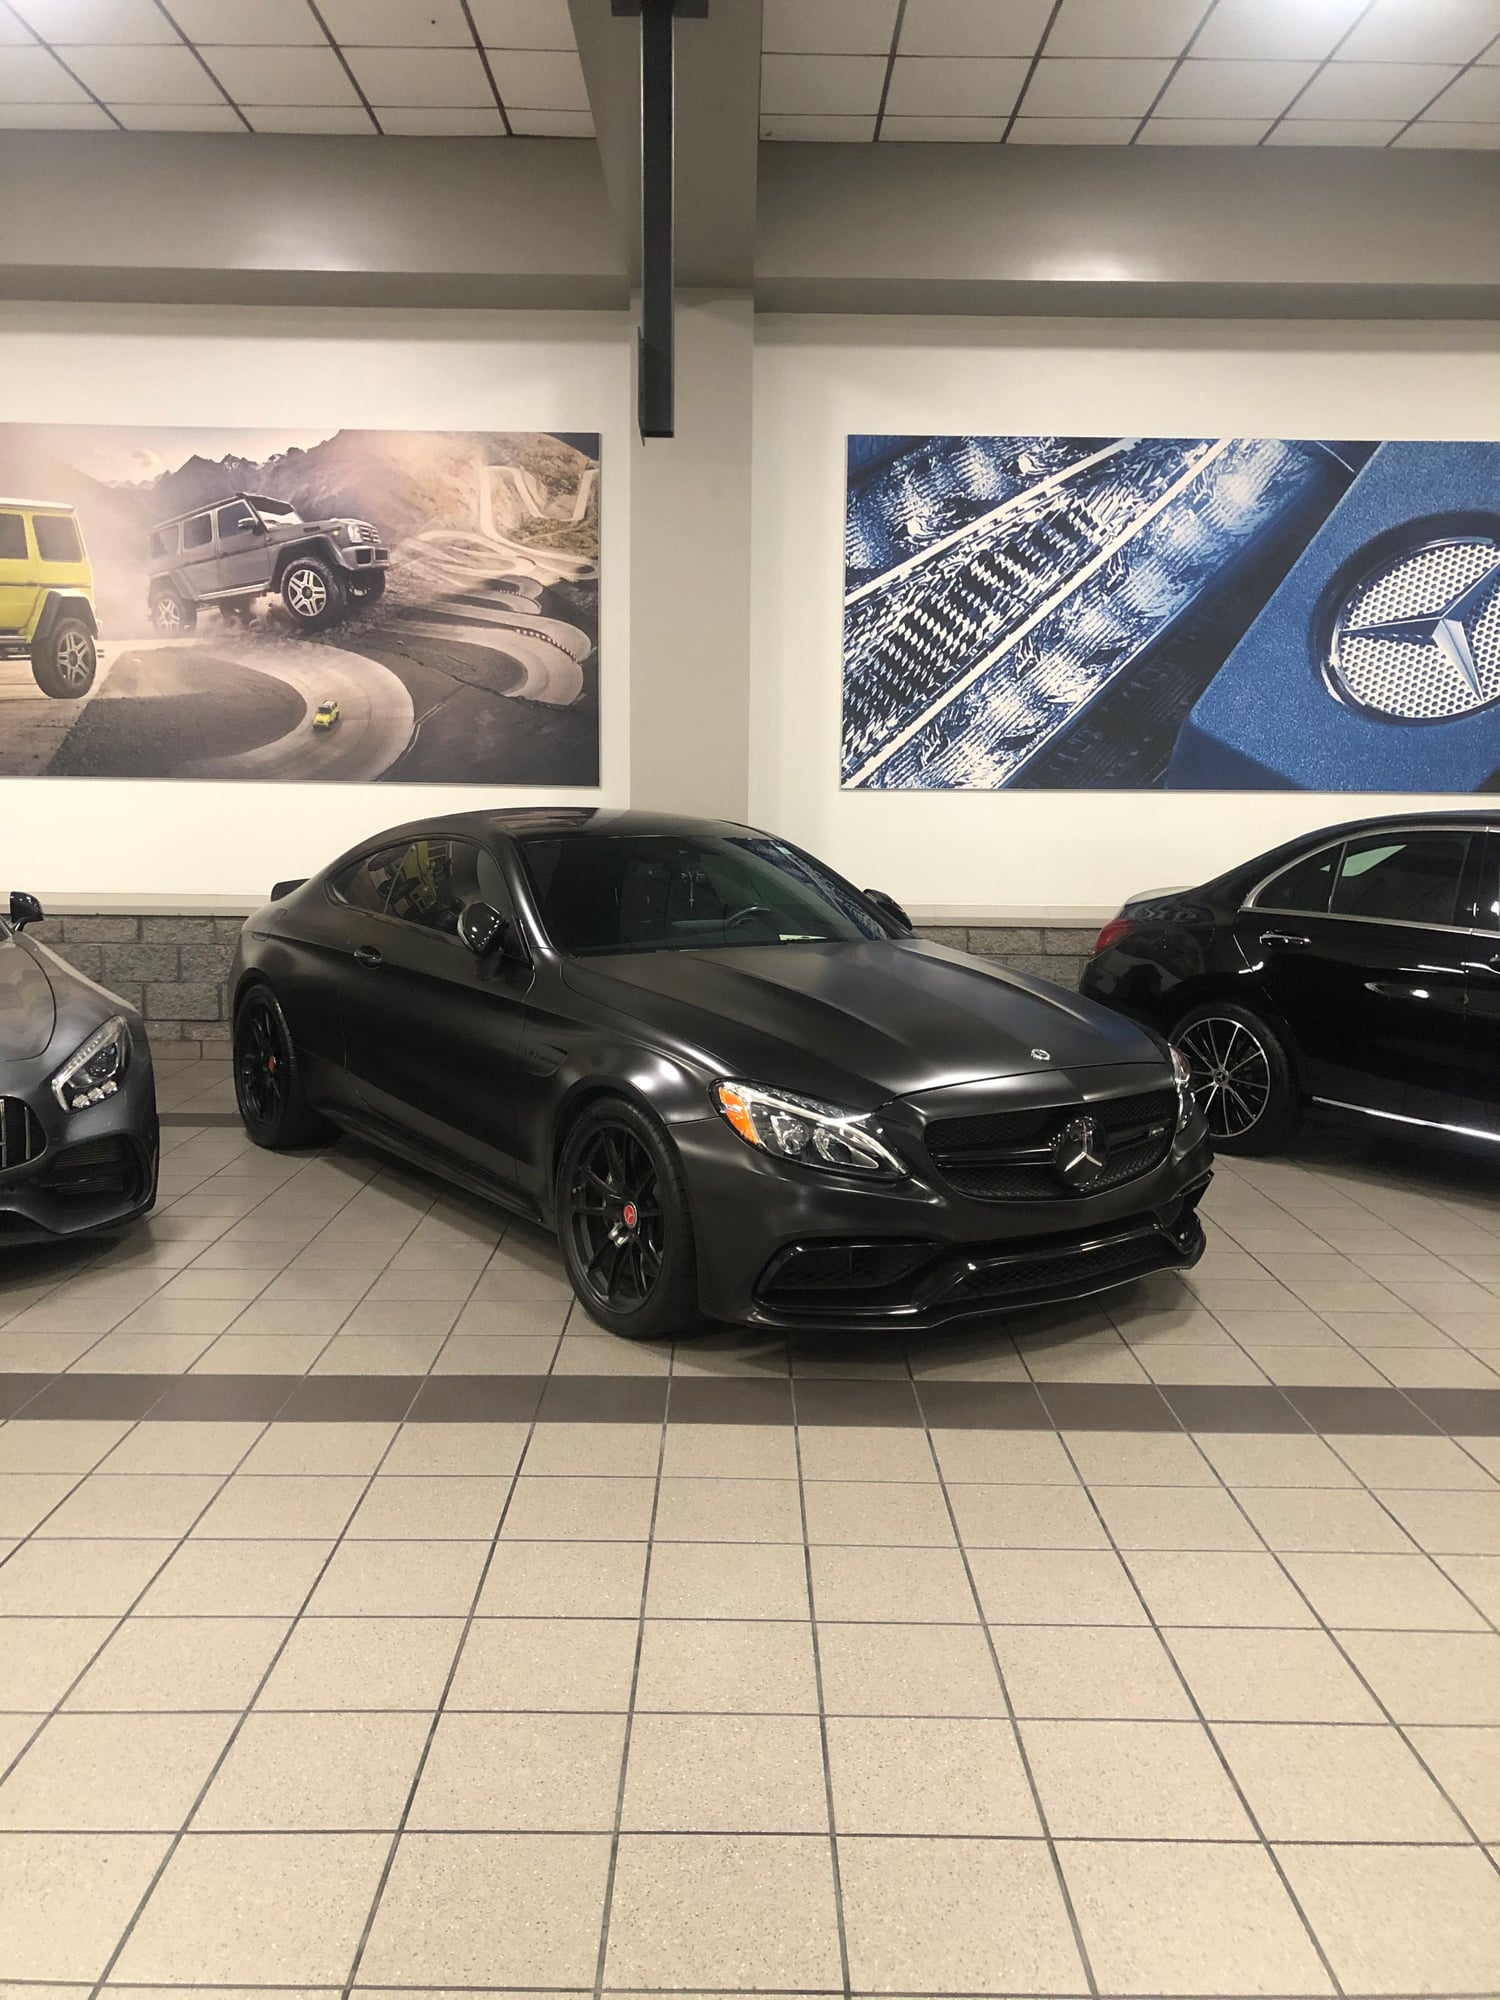 2017 Mercedes-Benz C63 AMG - 2017 Mercedes C63 Coupe For Sale - Used - VIN WDDWJ8GB1HF449425 - 8 cyl - 2WD - Automatic - Coupe - Gray - San Diego, CA 92122, United States